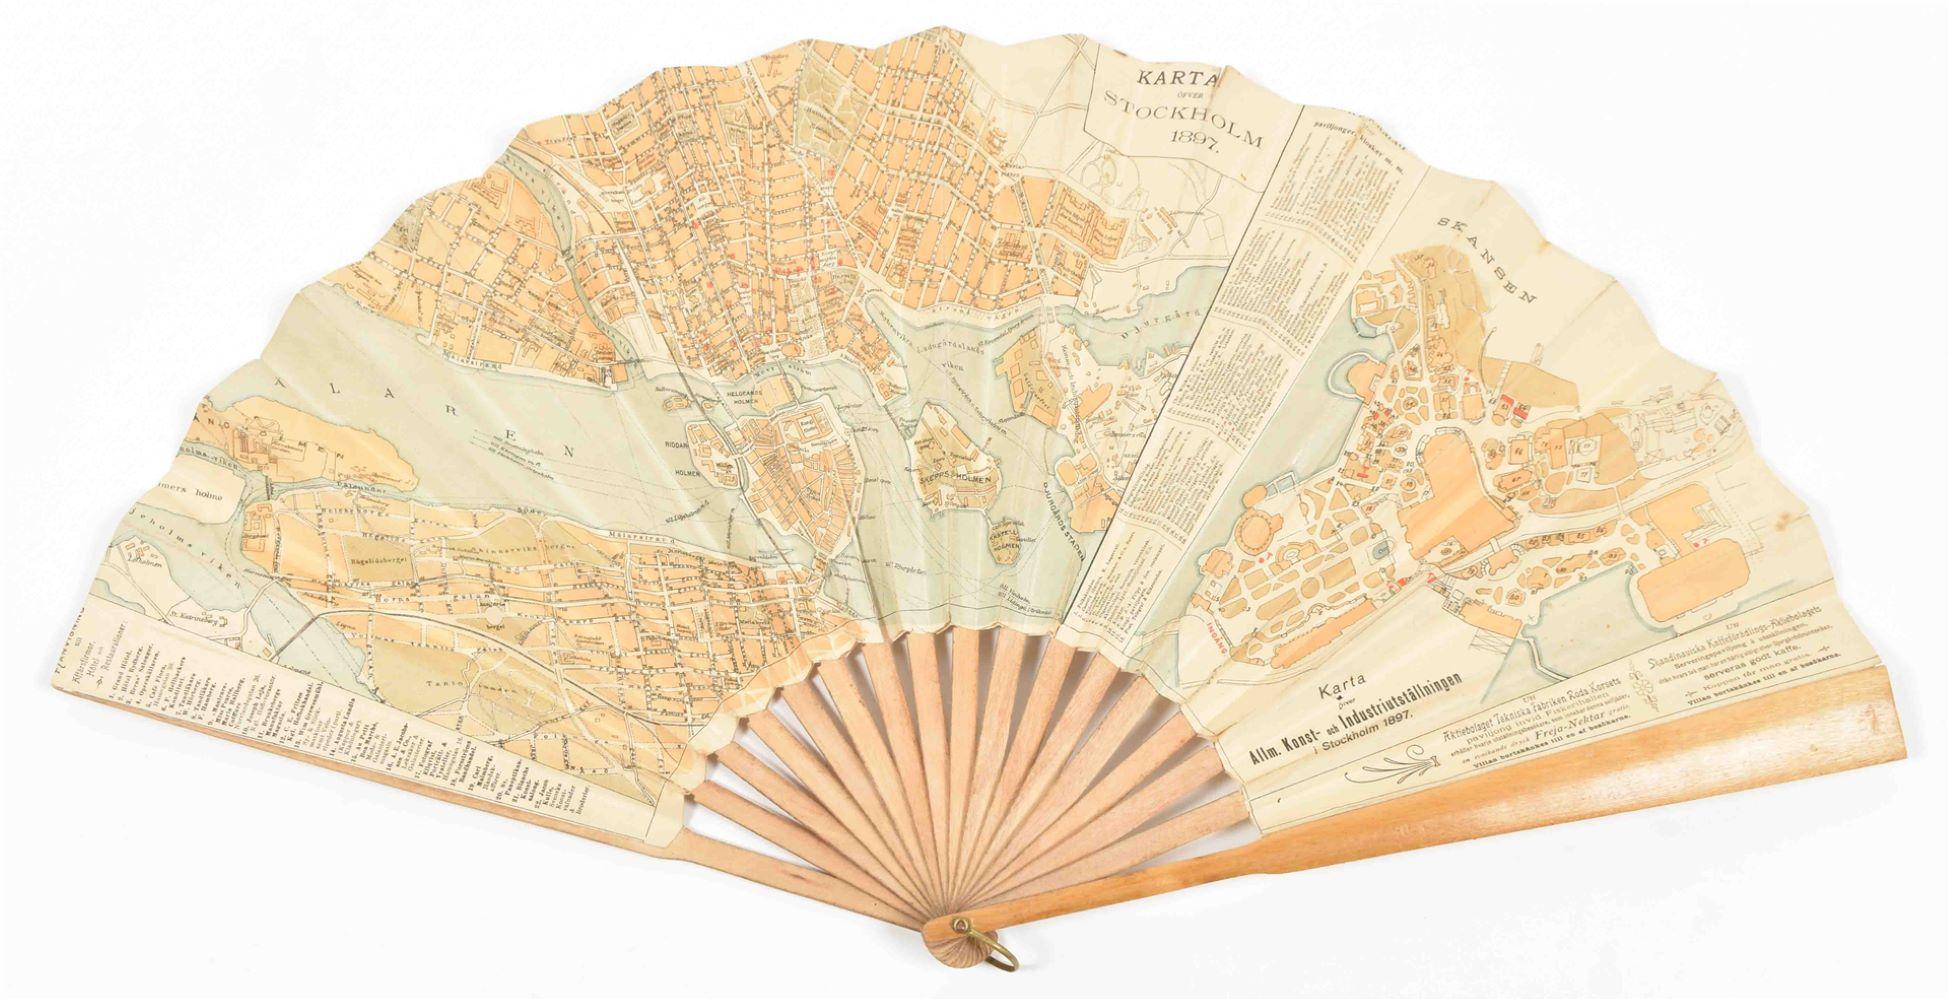 Colored lithographic plan printed on one side of a large fan, with legends and inset map 